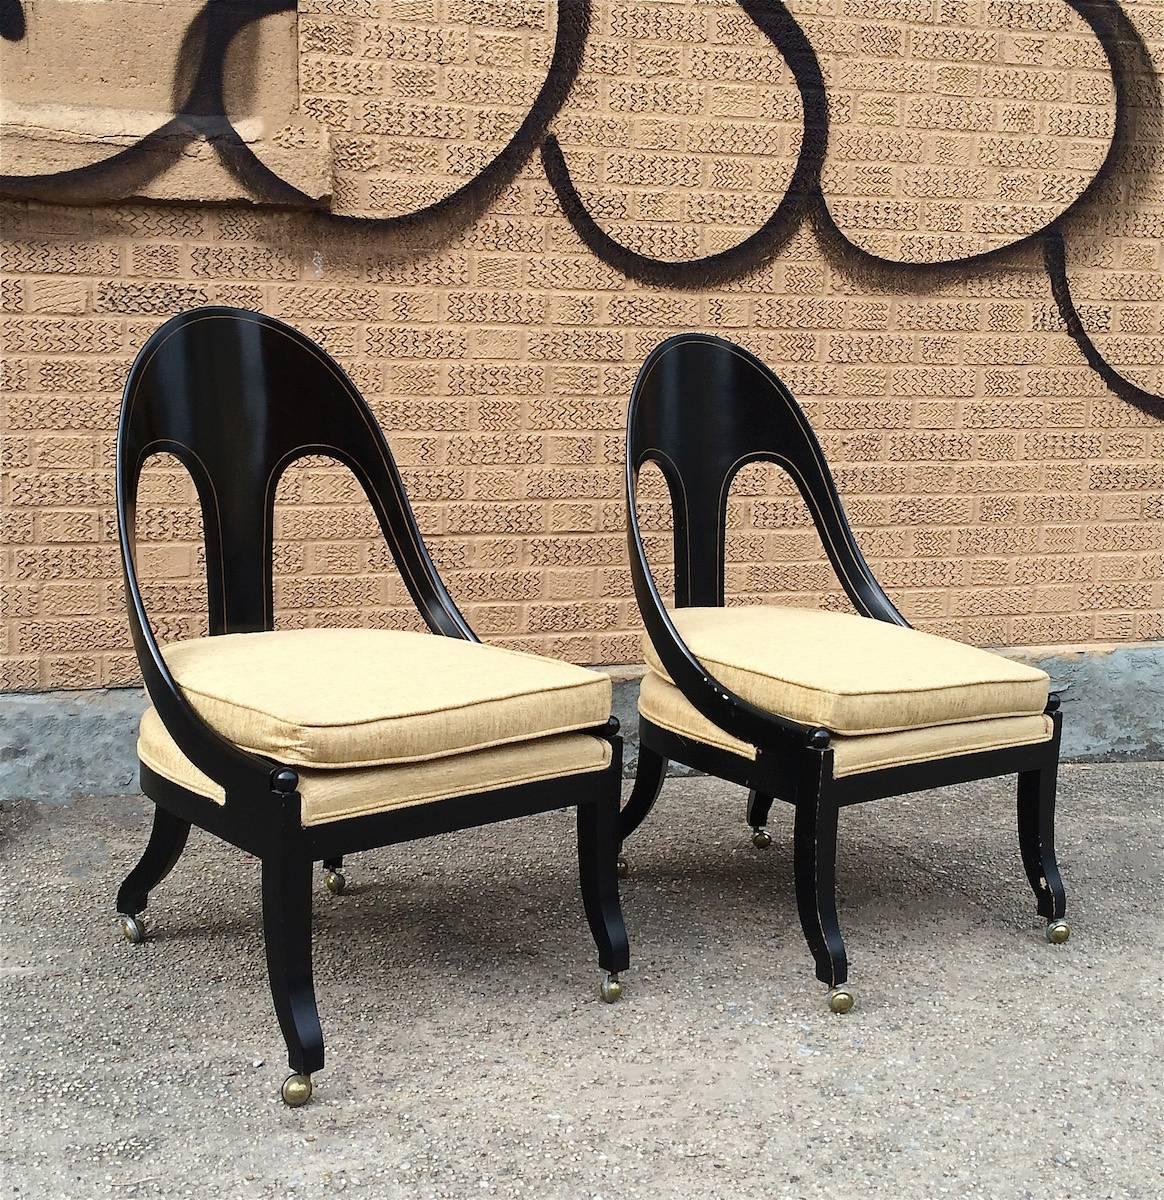 Pair of neoclassical, spoon back chairs in the style of Michael Taylor for Baker with lacquered black frames that roll on casters. Seats and cushions are newly upholstered in a gold chenille.